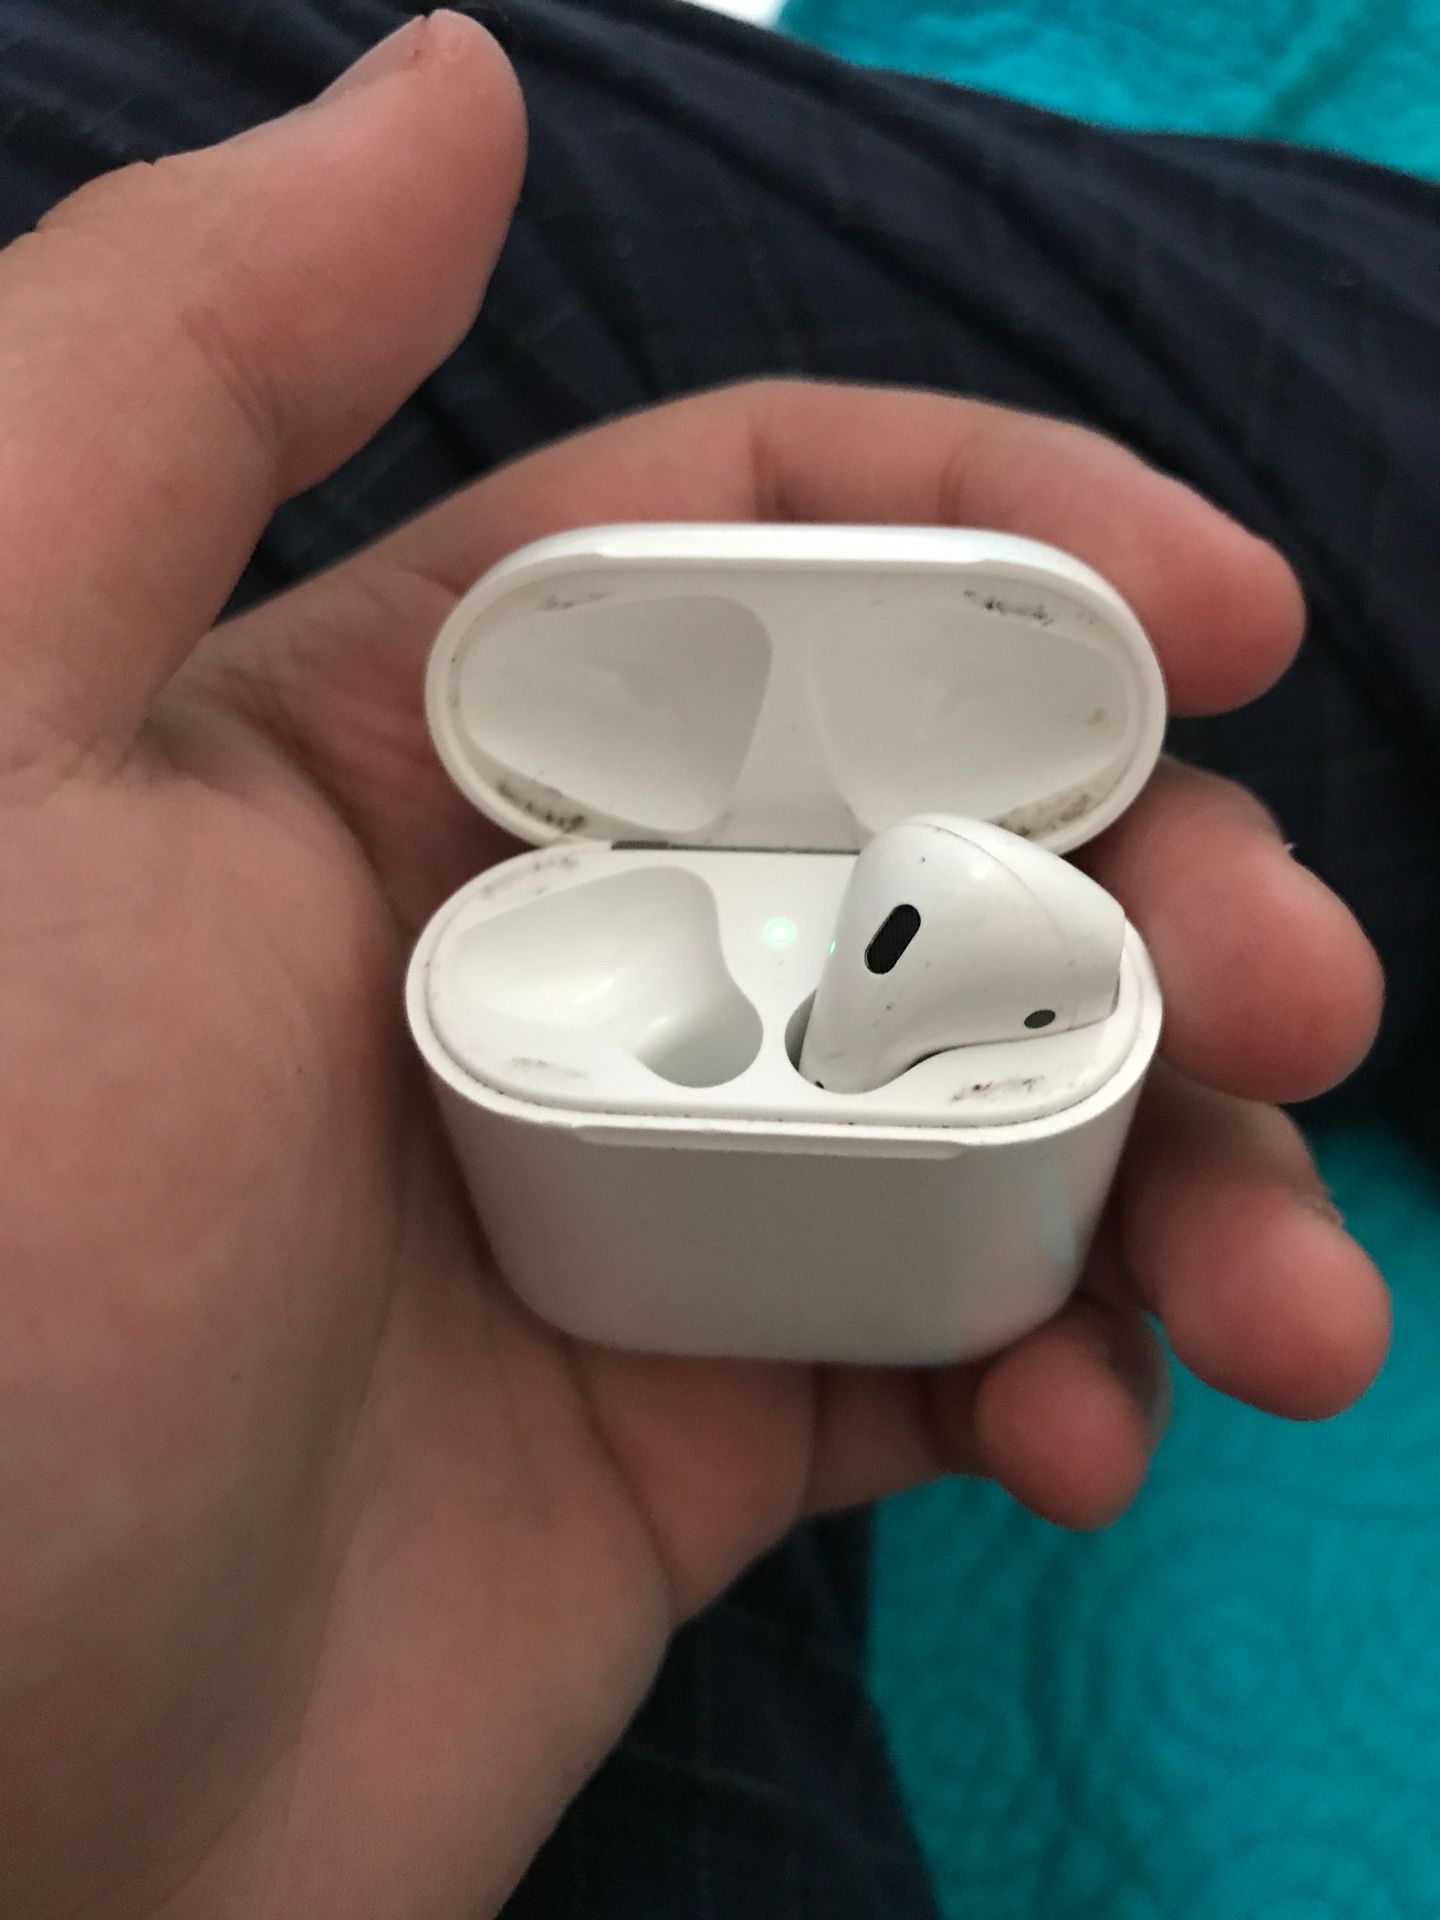 AirPods missing *left* pair